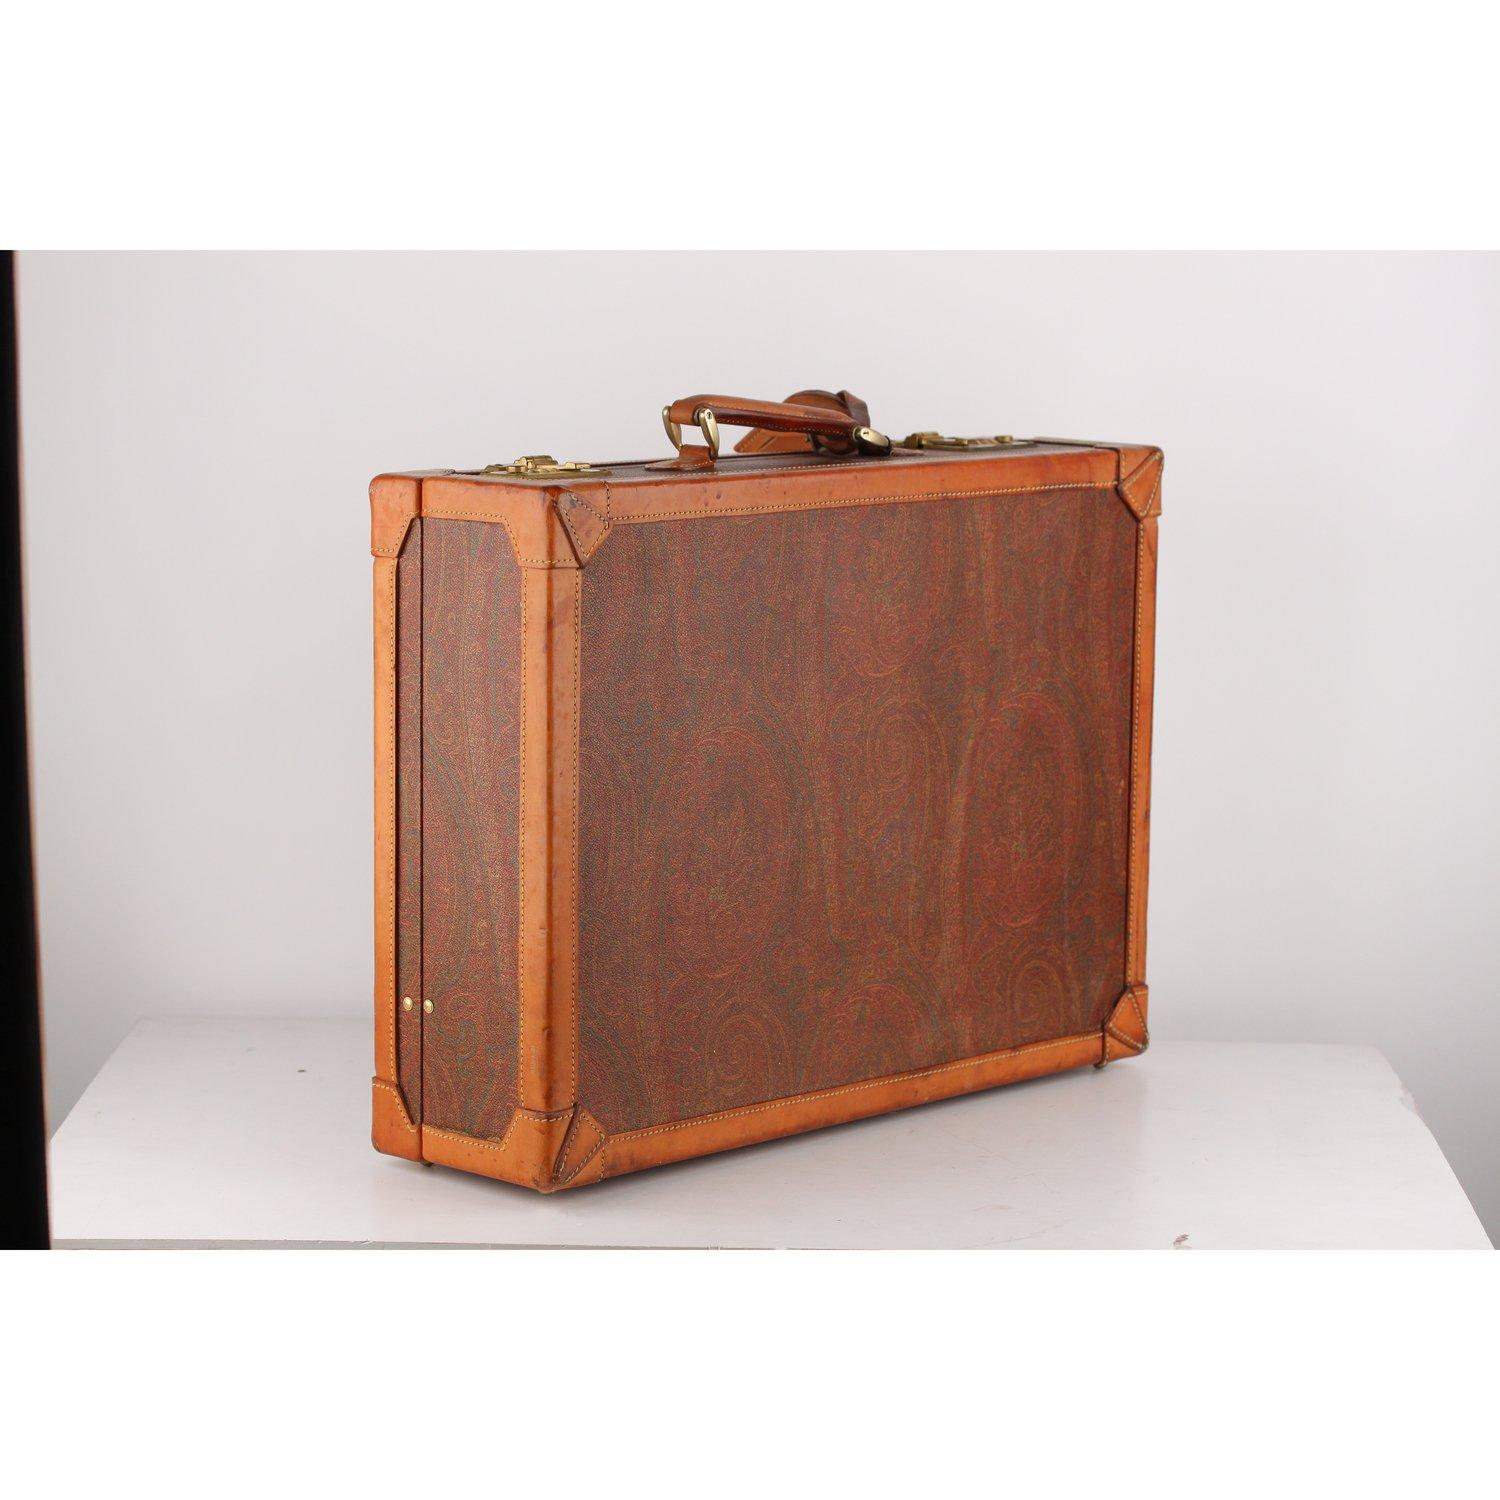 MATERIAL: Canvas, Leather COLOR: Brown MODEL: Briefcase GENDER: Women, Men SIZE: Large Condition CONDITION DETAILS: B :GOOD CONDITION - Some light wear of use - Some scratches, liquid stains and darkness on leather trim and on handle. Measurements